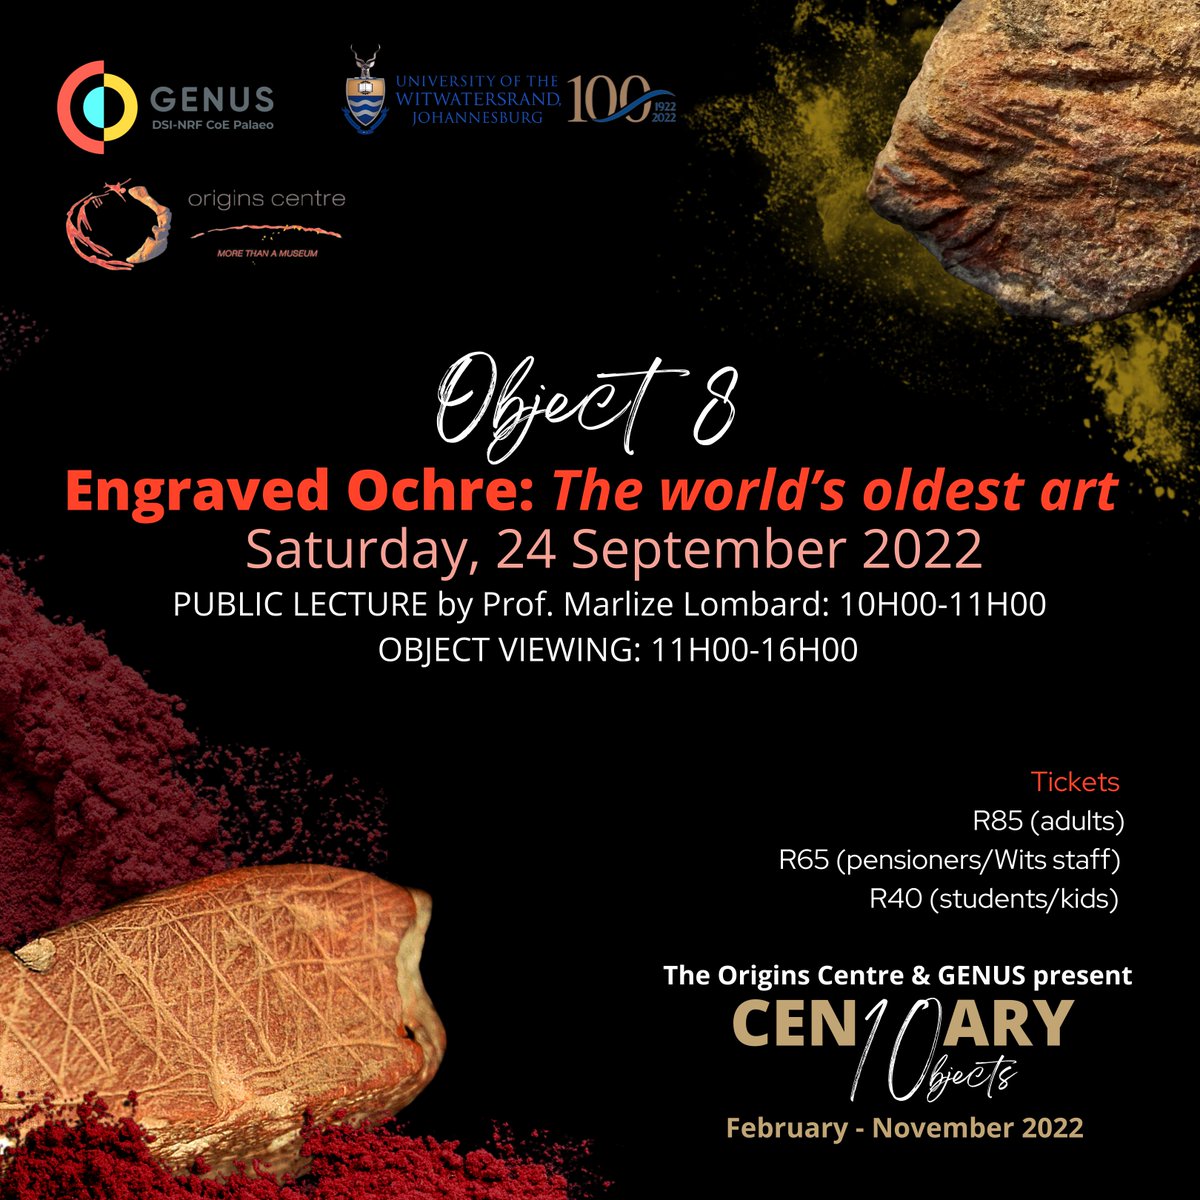 3 DAYS TO GO! Don't miss the public lecture by Prof Marlize Lombard this Saturday. The topic is 'What do we know about the human mind at the time of the earliest art?' The Original engraved ochre fragments from Blombos, Sibudu and Rose Cottage Cave will be on display #Wits100